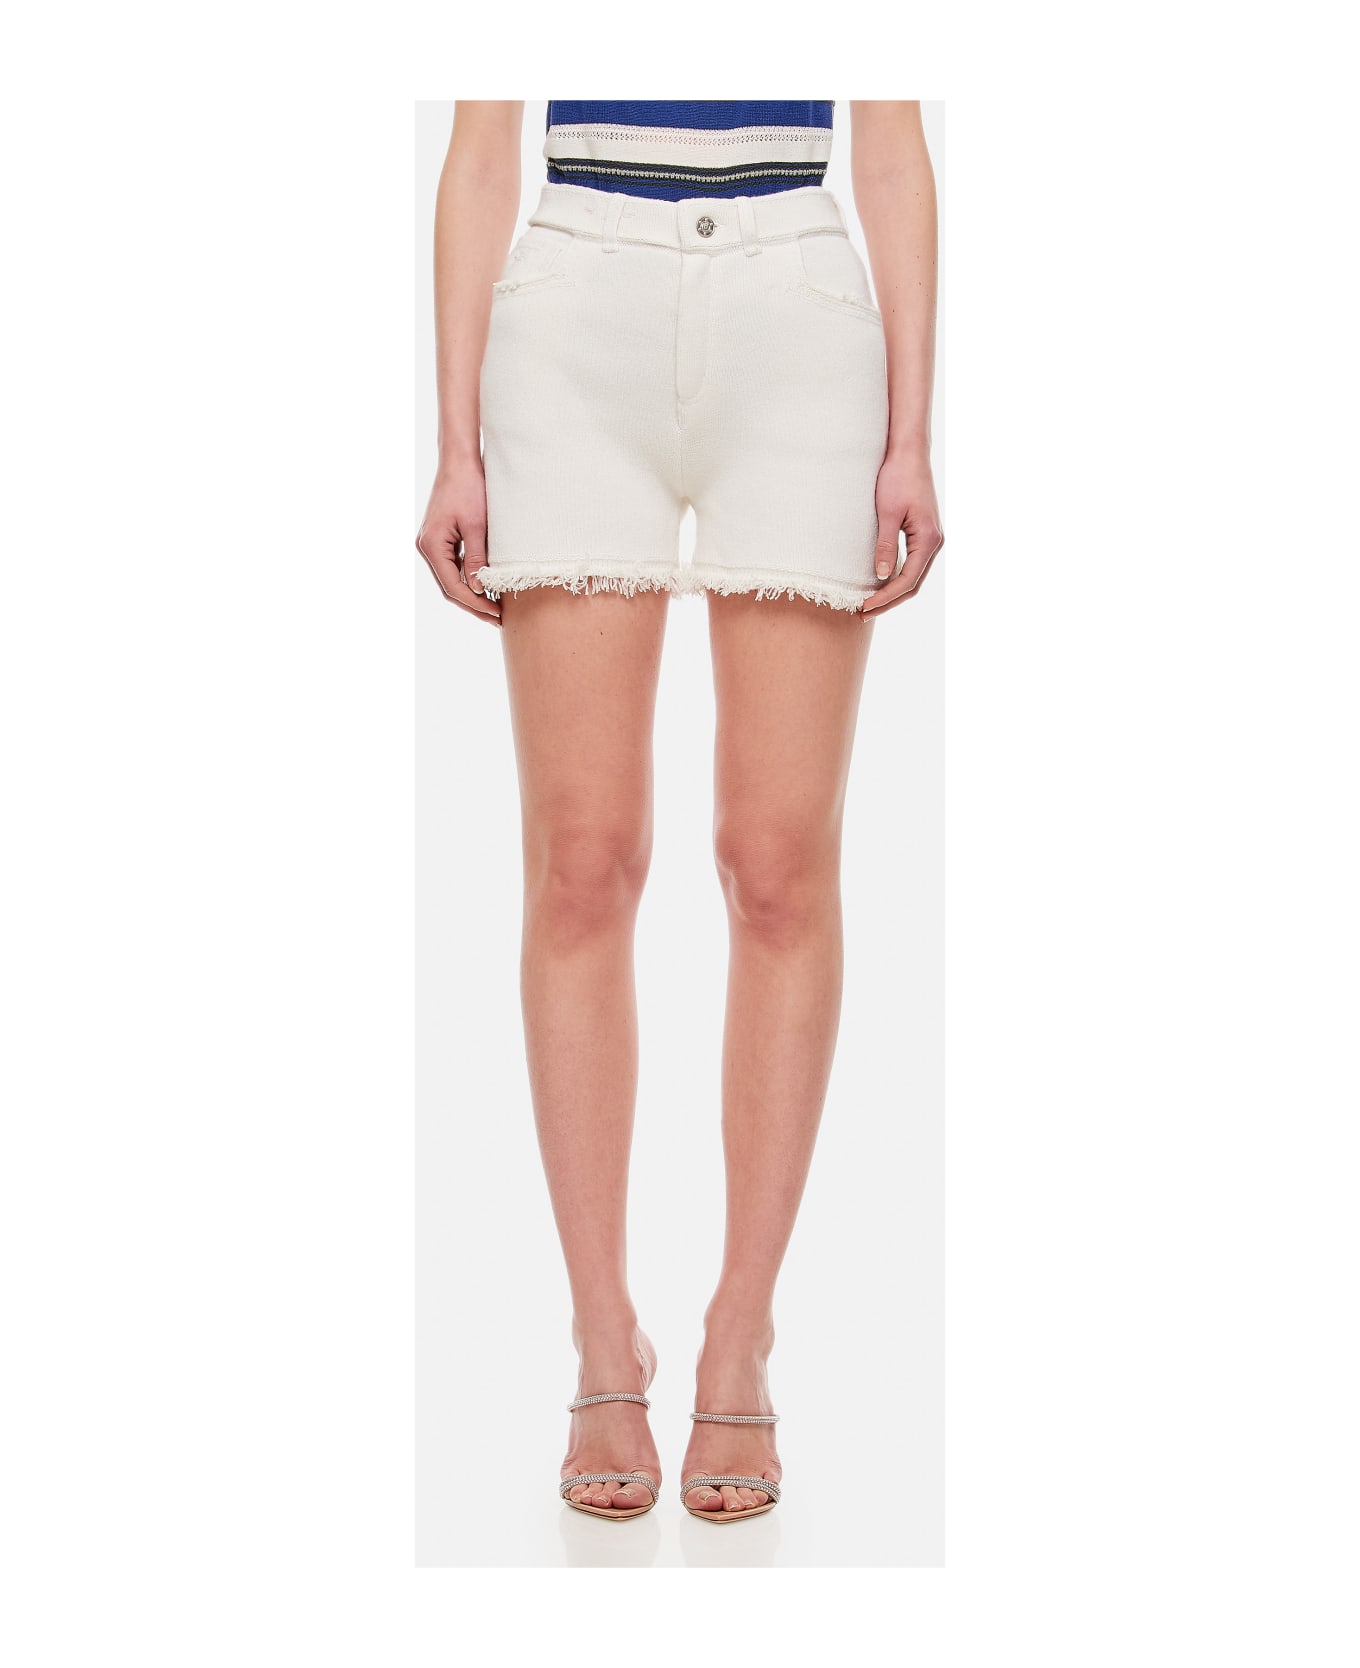 Barrie Cashmere Shorts - White